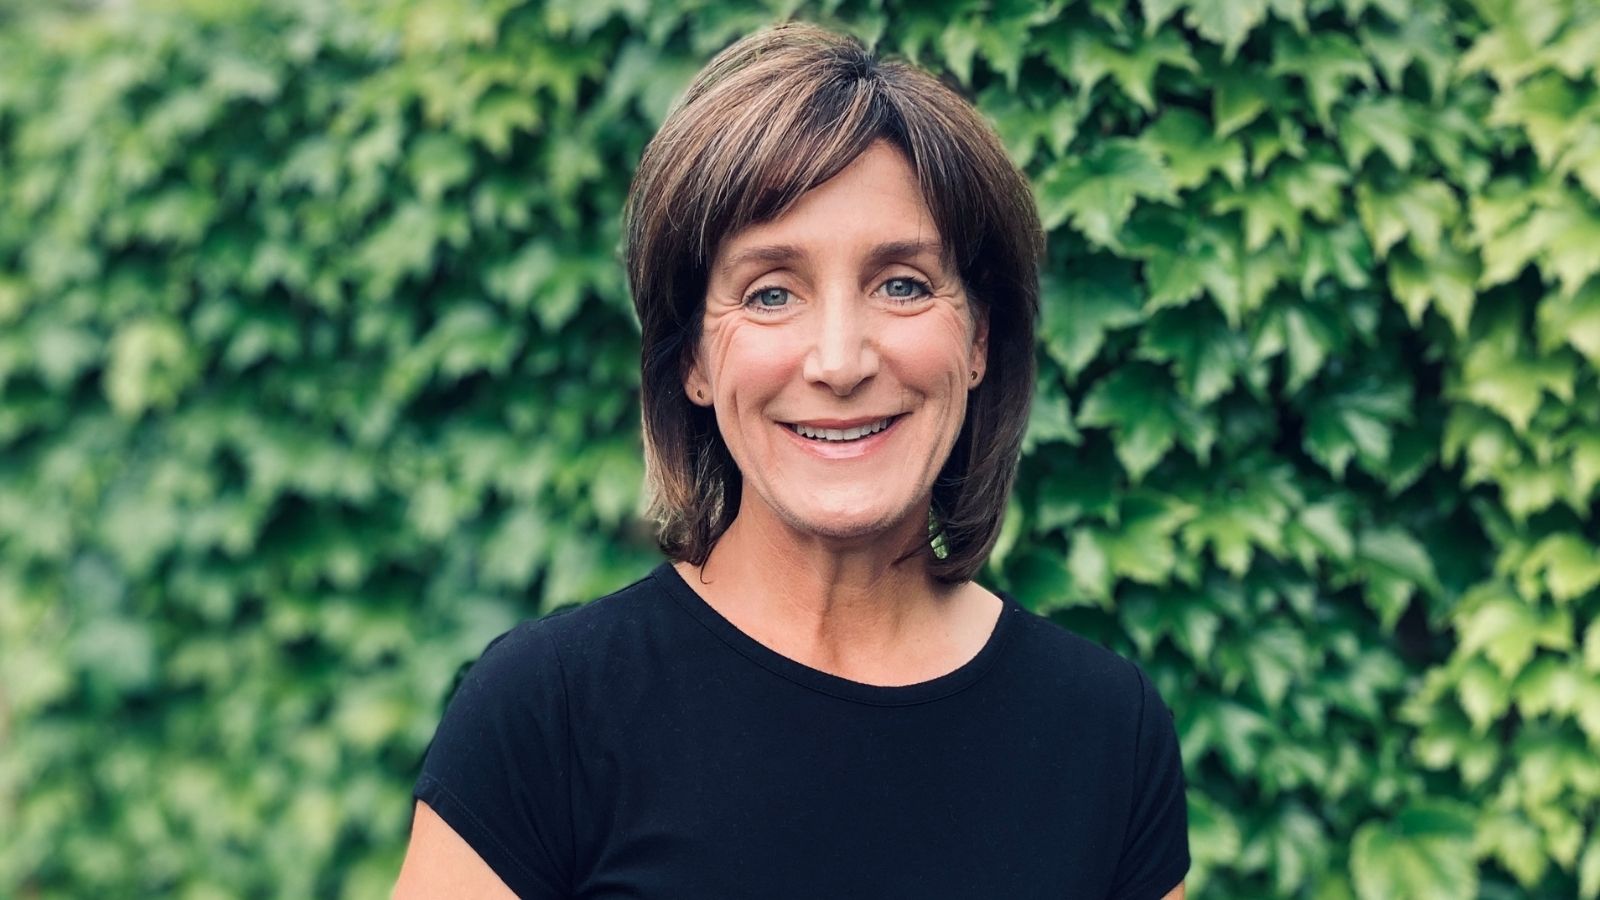 Women In Wellness: Dena Feingold of Care Alliance Advocacy on the Five Lifestyle Tweaks That Will Help Support People’s Journey Towards Better Wellbeing